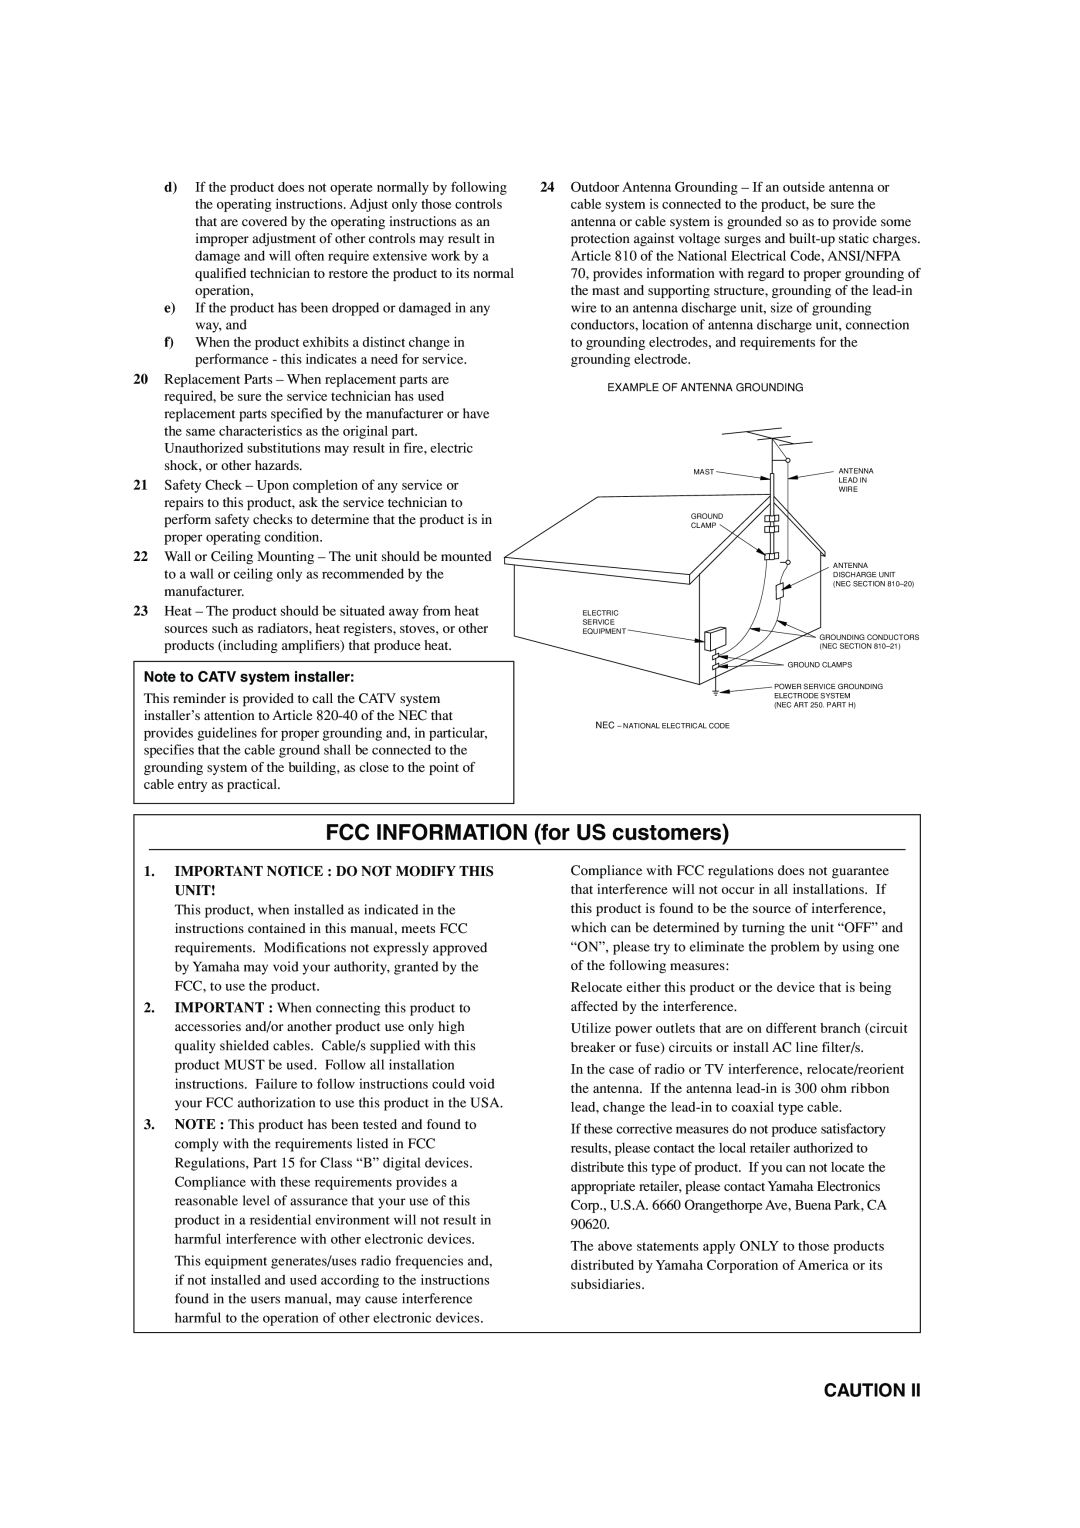 Yamaha RX-V740 owner manual FCC INFORMATION for US customers, Note to CATV system installer 